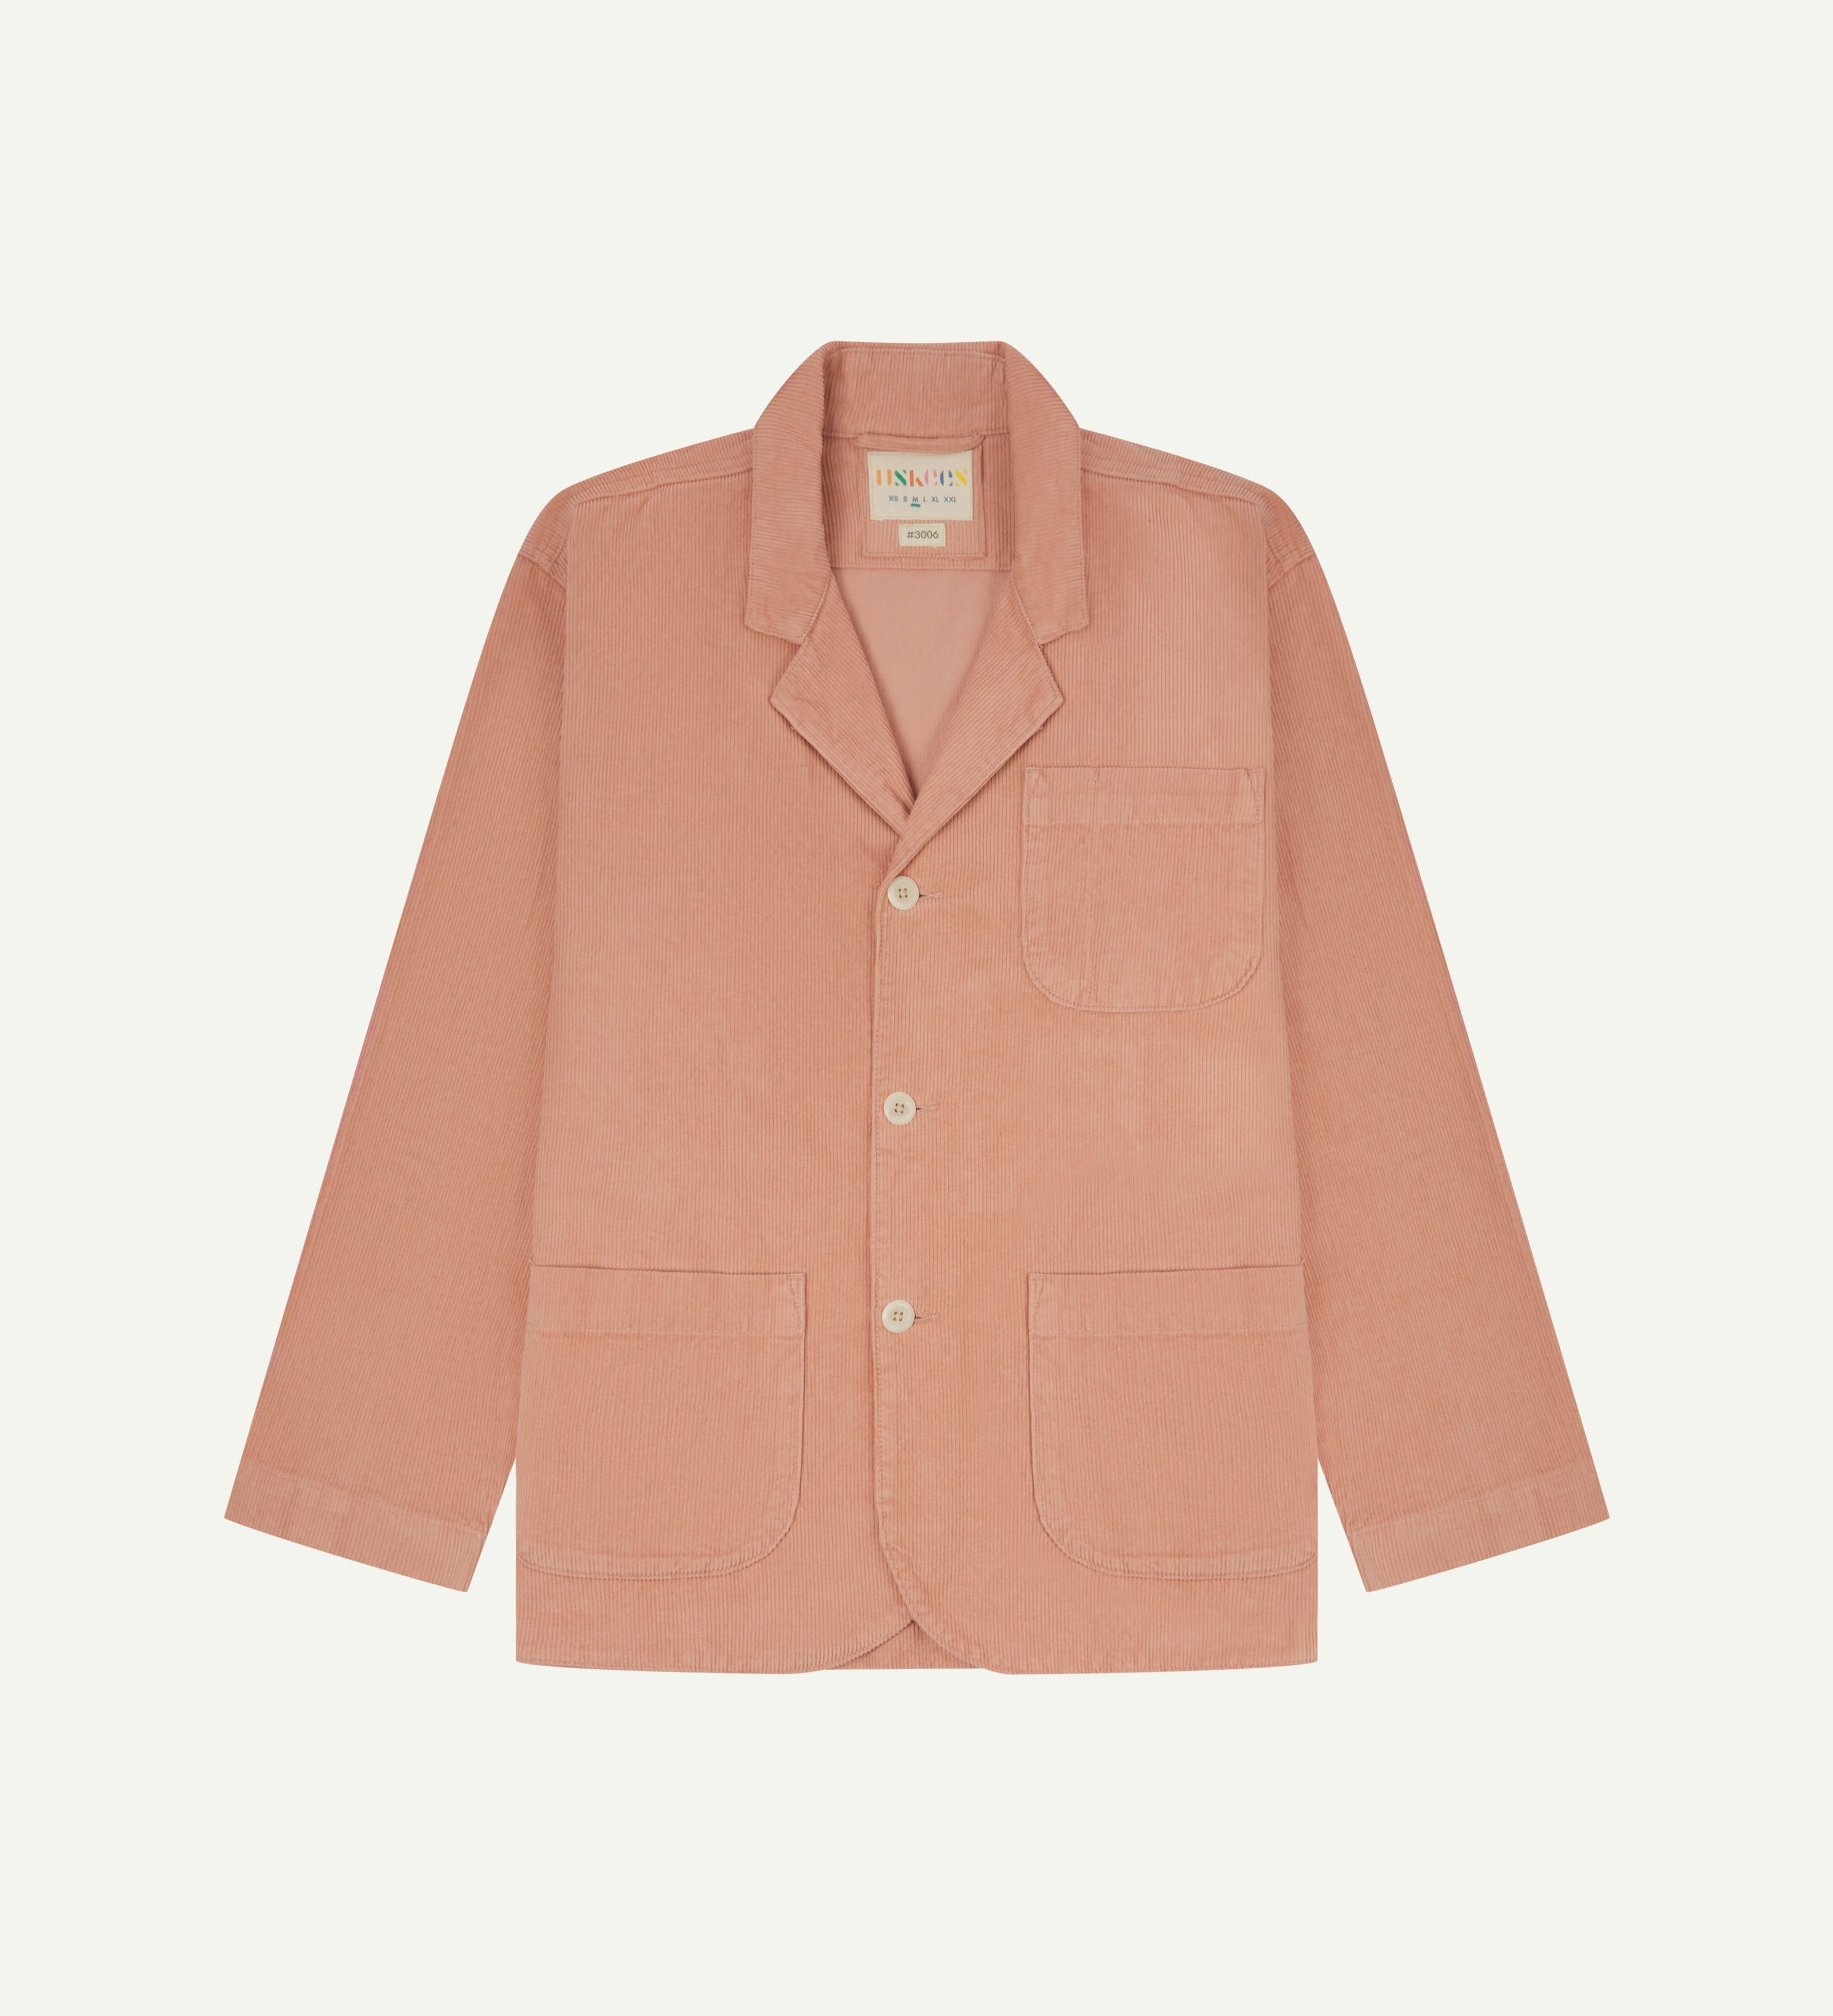 Front flat shot of Uskees pale pink corduroy men's blazer buttoned up